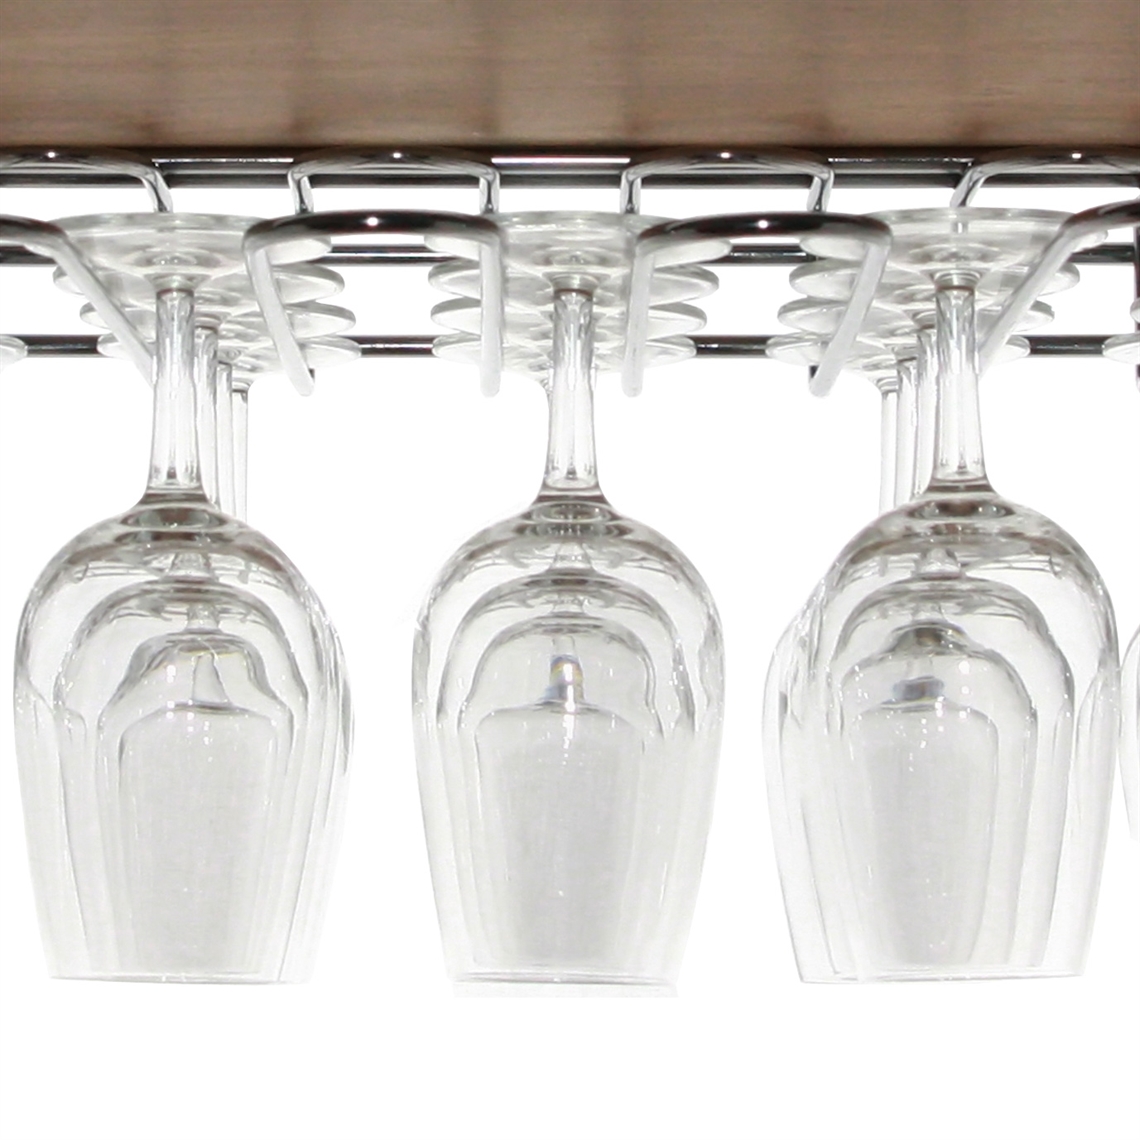 View more cocktail shakers from our Wine Glass Hanging Racks range